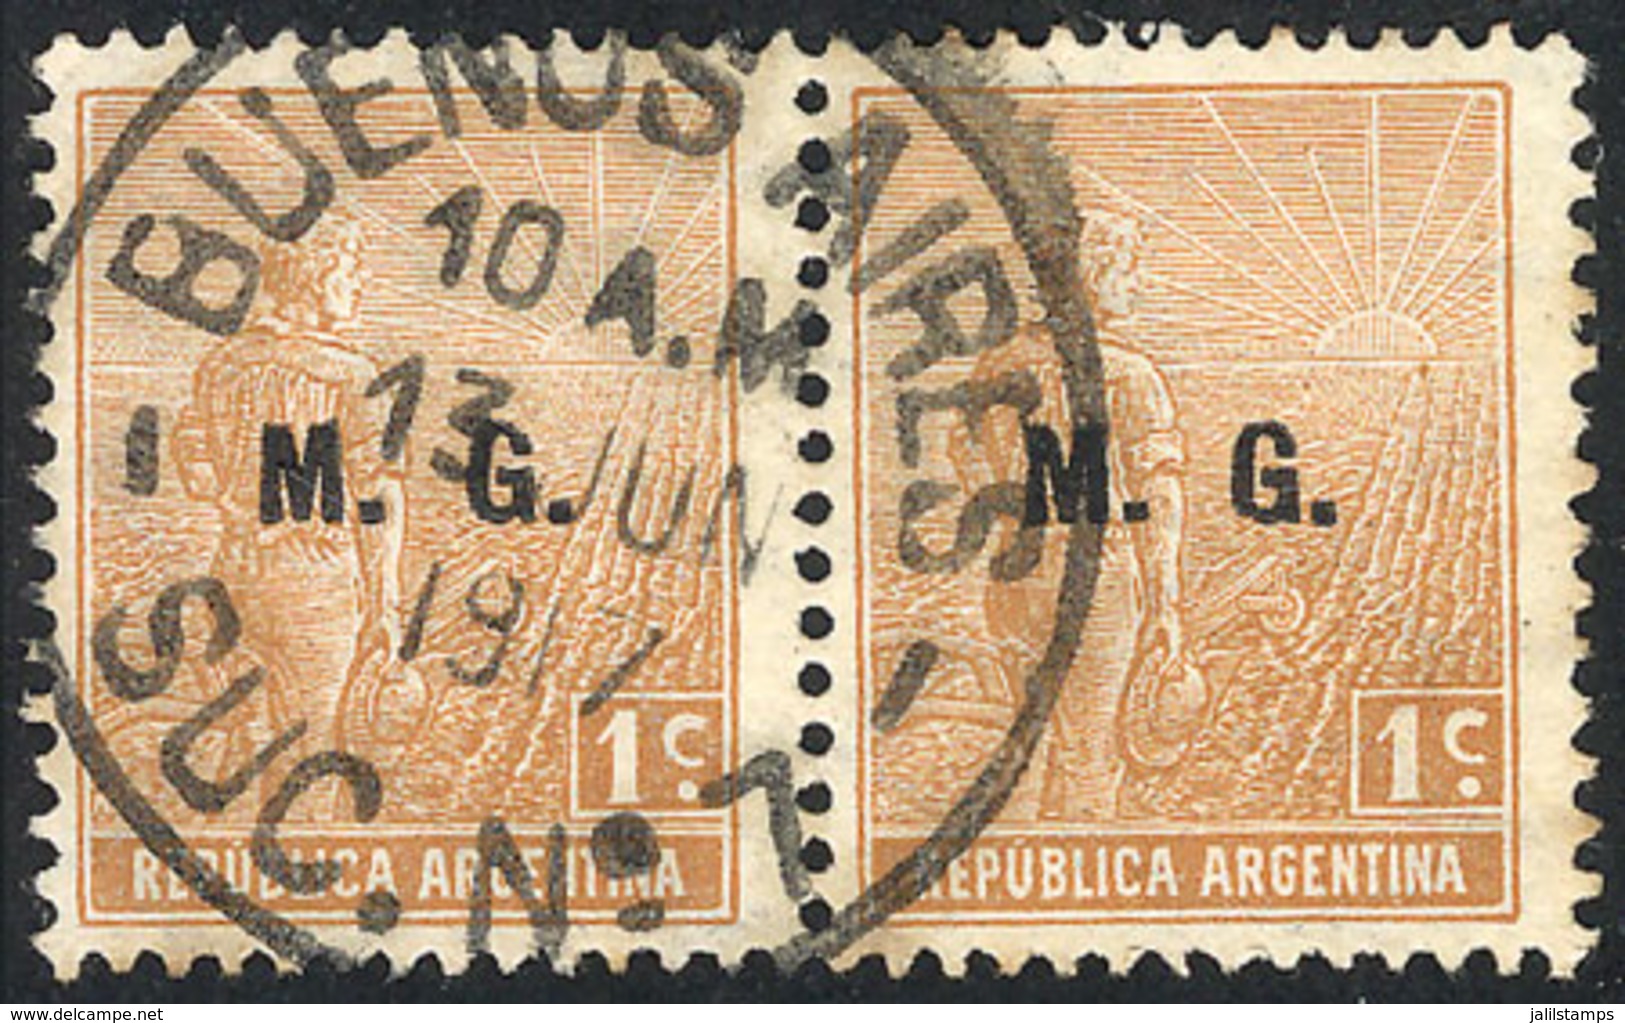 ARGENTINA: GJ.134, 1915 1c. Plowman With M.G. Overprint, Italian Paper With Horiz Honeycomb Wmk, Used Pair, VF, Rare! - Officials